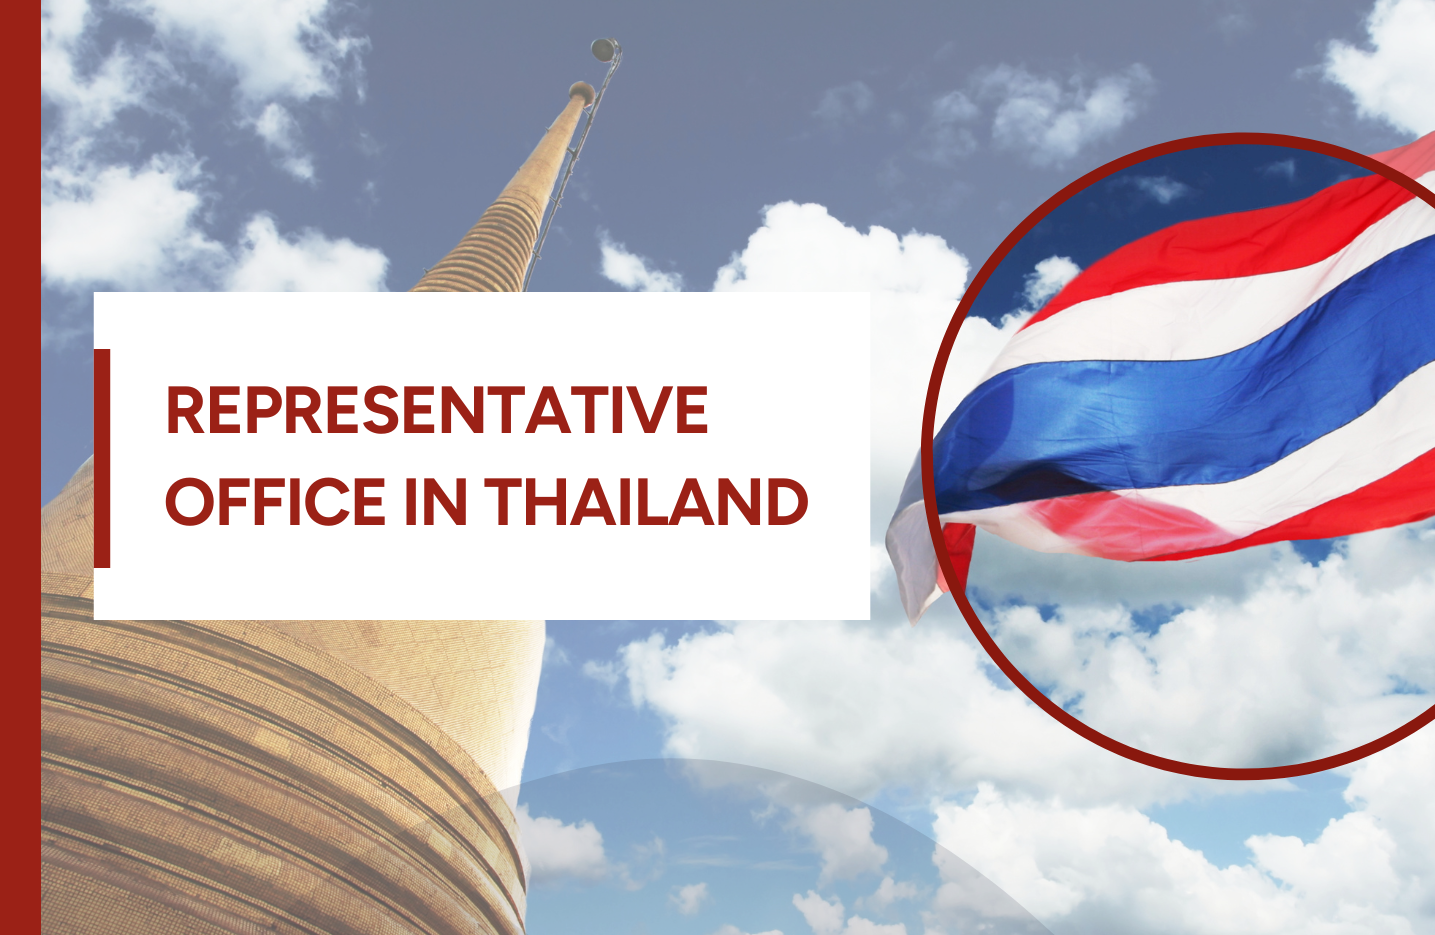 Representative office in Thailand: what should you know?